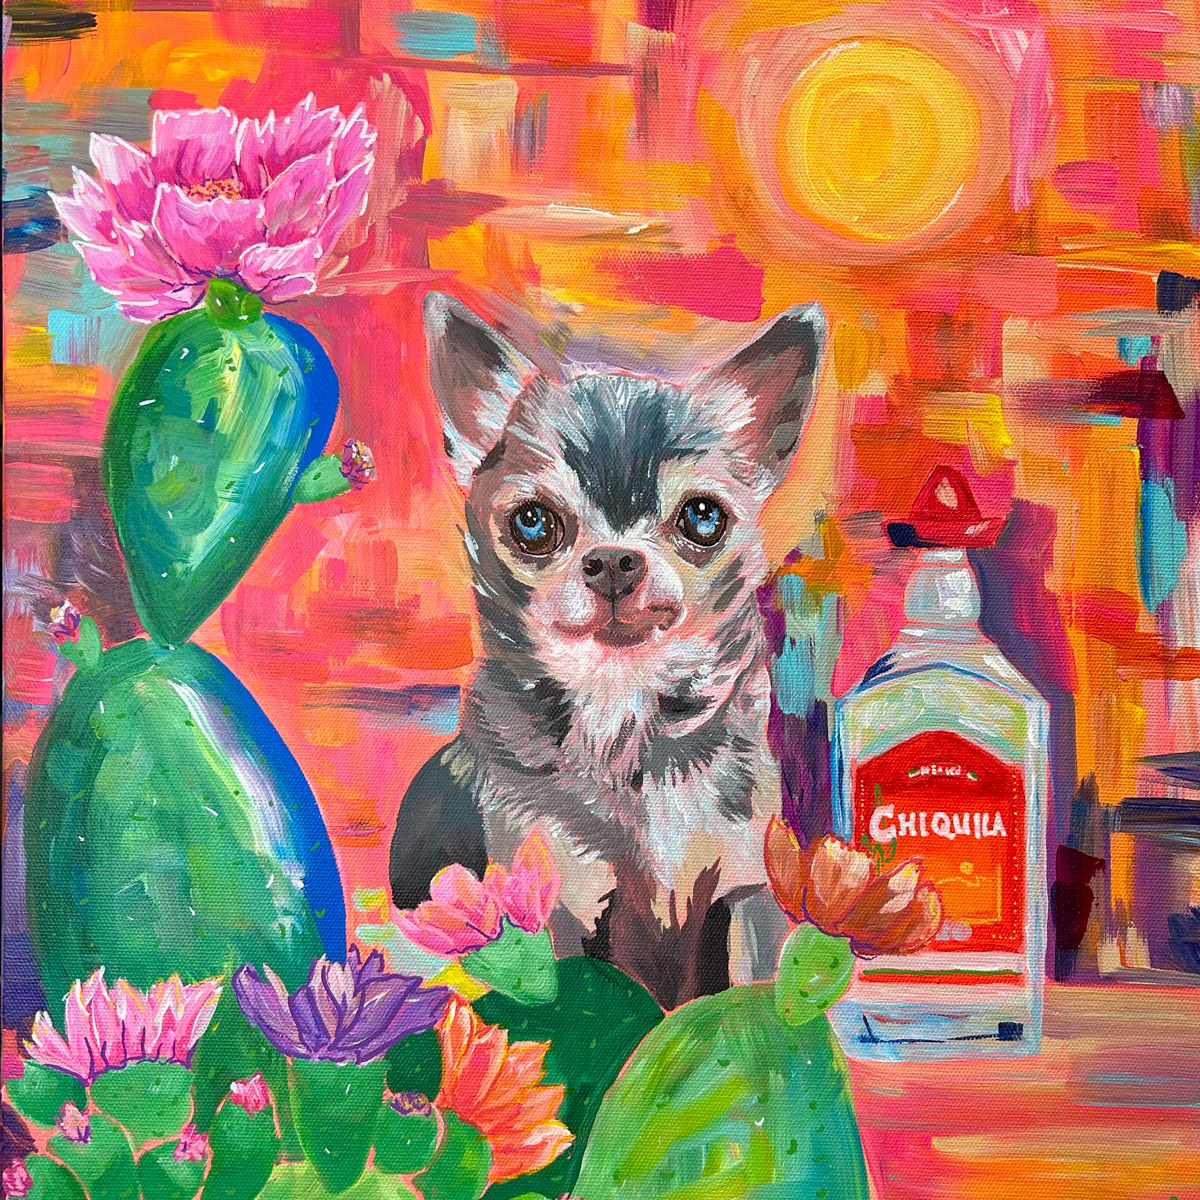 Painting of a Chihuahua with a tequila bottle and prickly pear - Michelle Taranto - Arco Iris Interiors